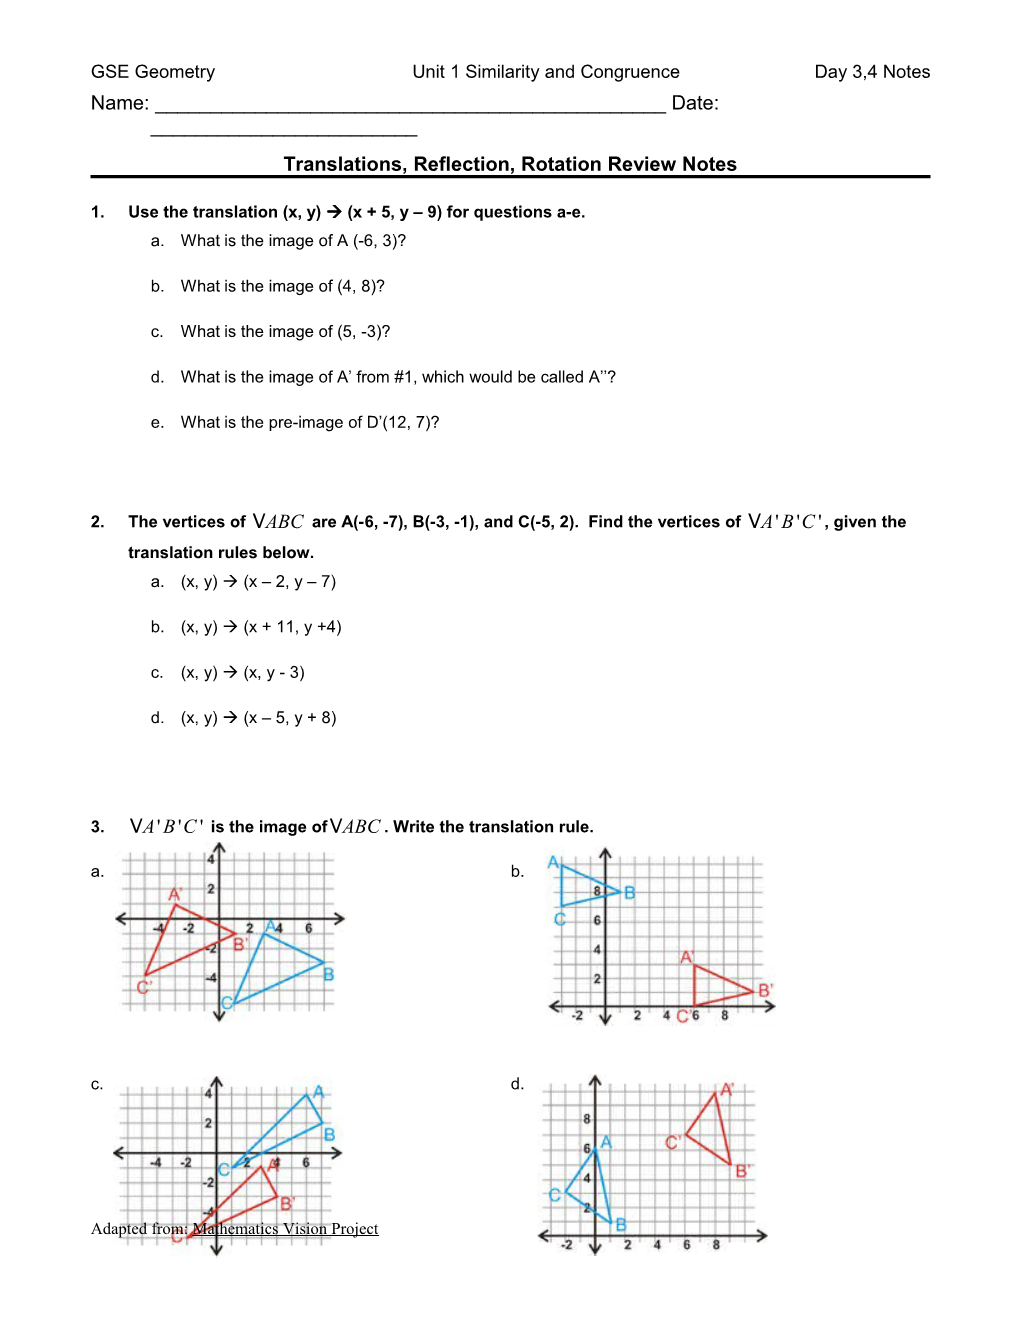 GSE Geometry Unit 1 Similarity and Congruenceday 3,4 Notes